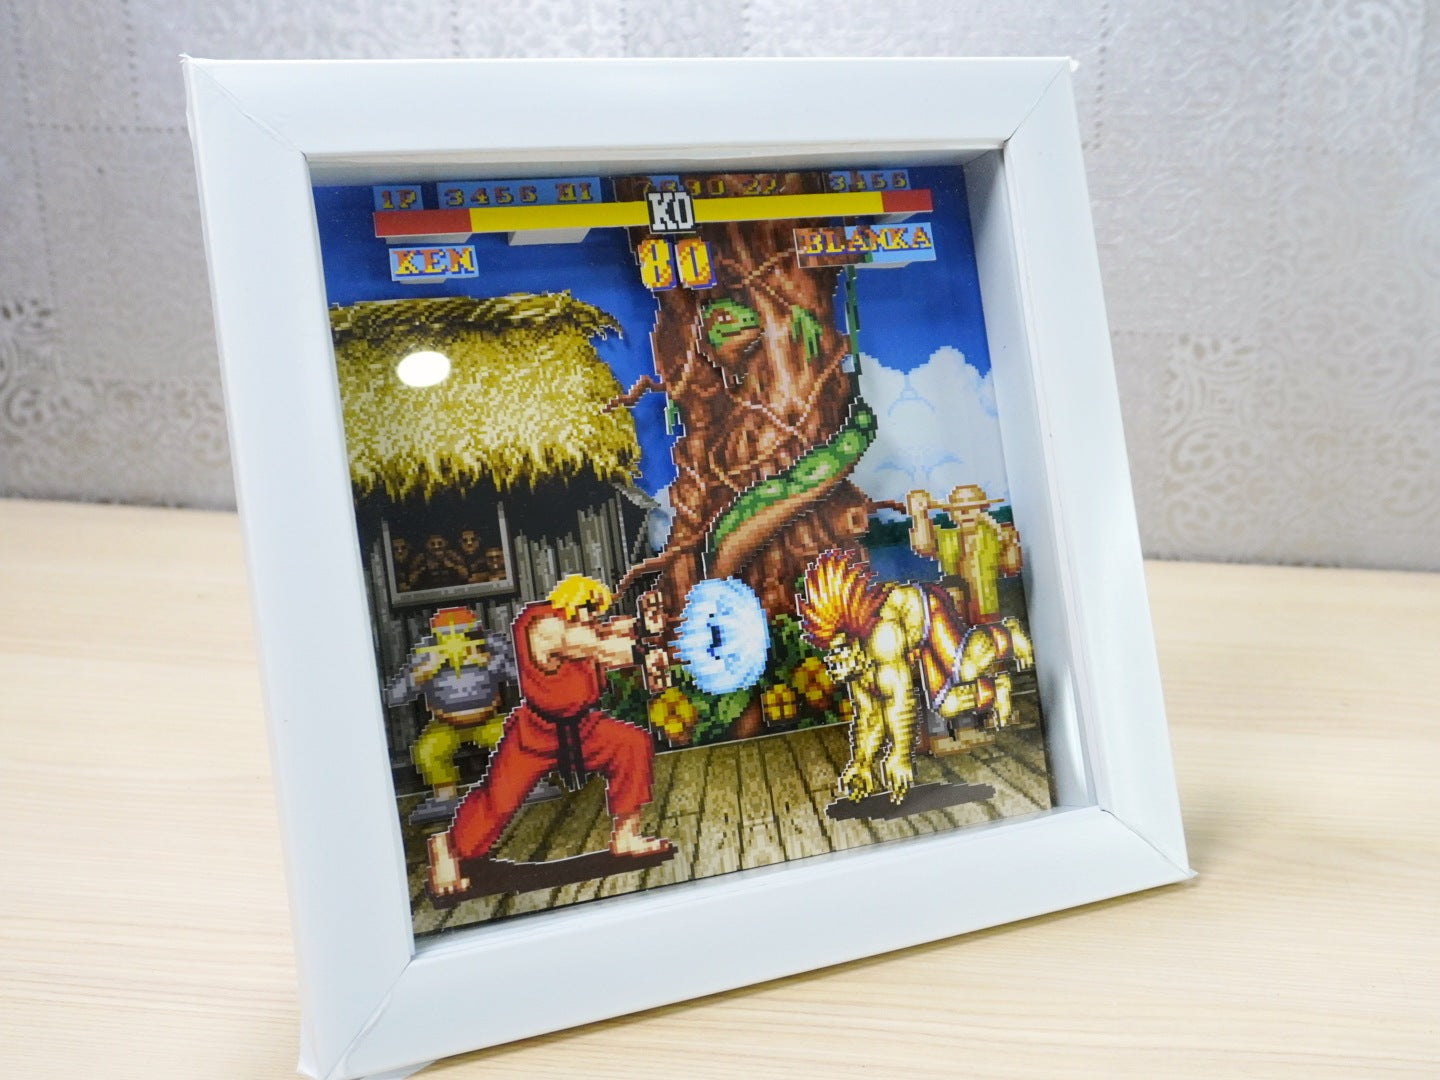 3D Retro Games Diorama Frame: Blanka's Stage - Street Fighter 2 - 20x20cm with Music